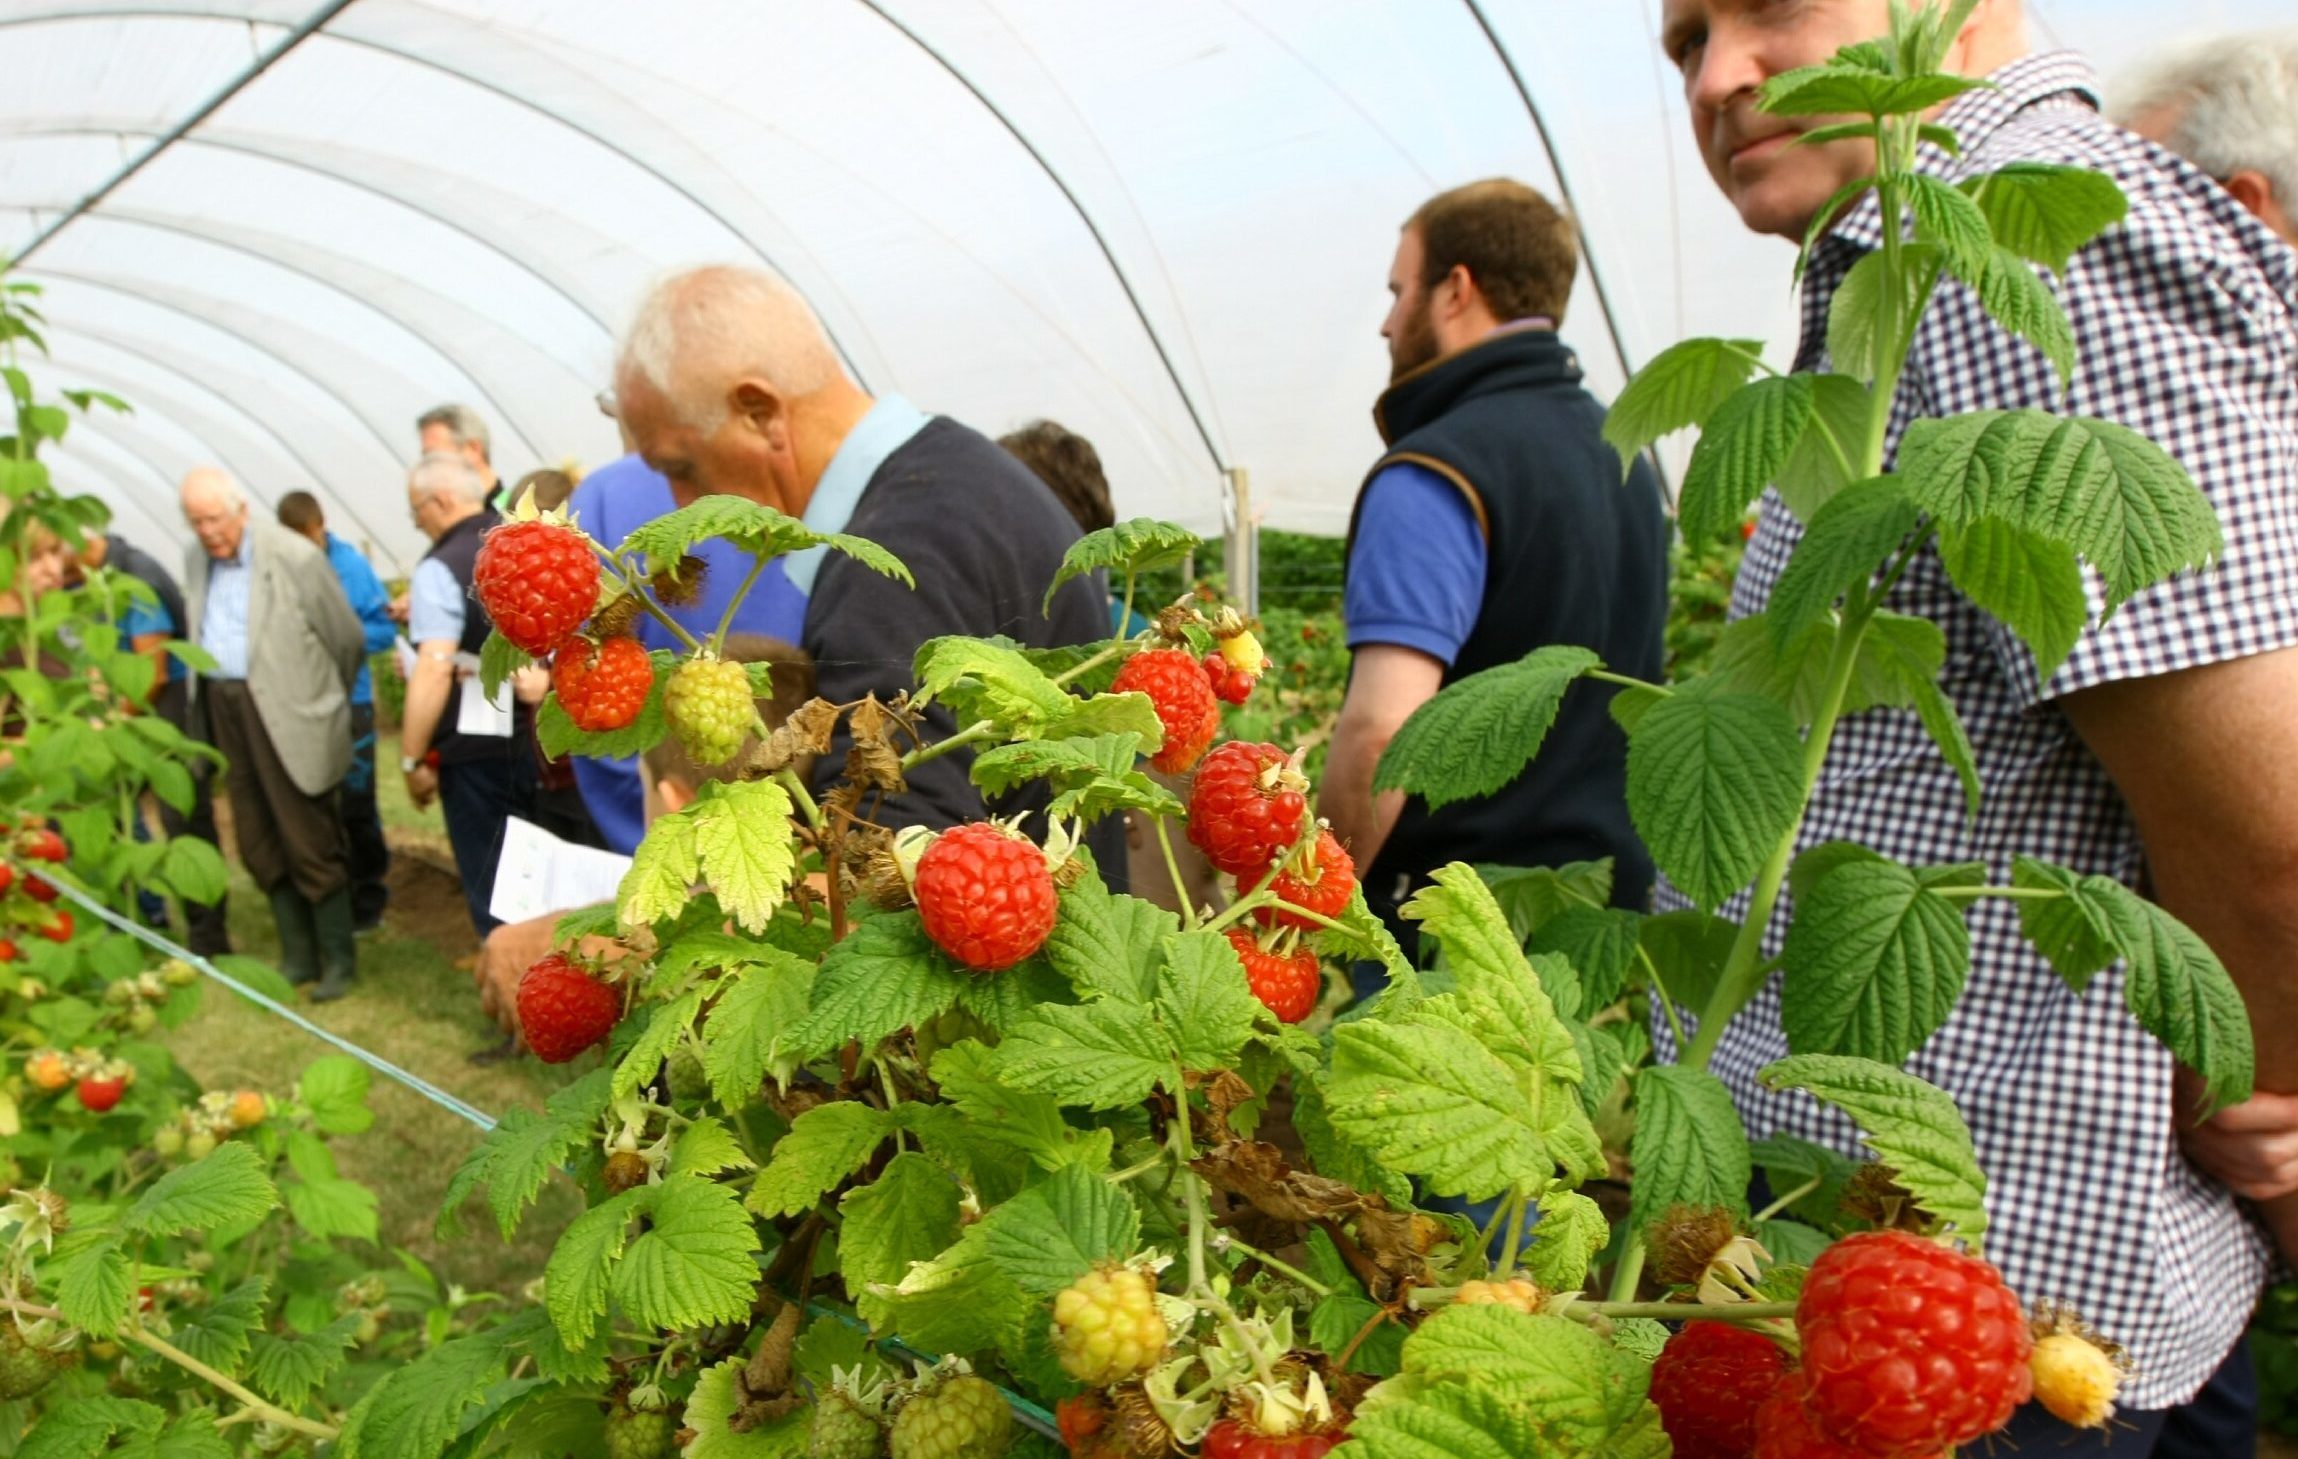 The soft fruit industry relies heavily on seasonal labour